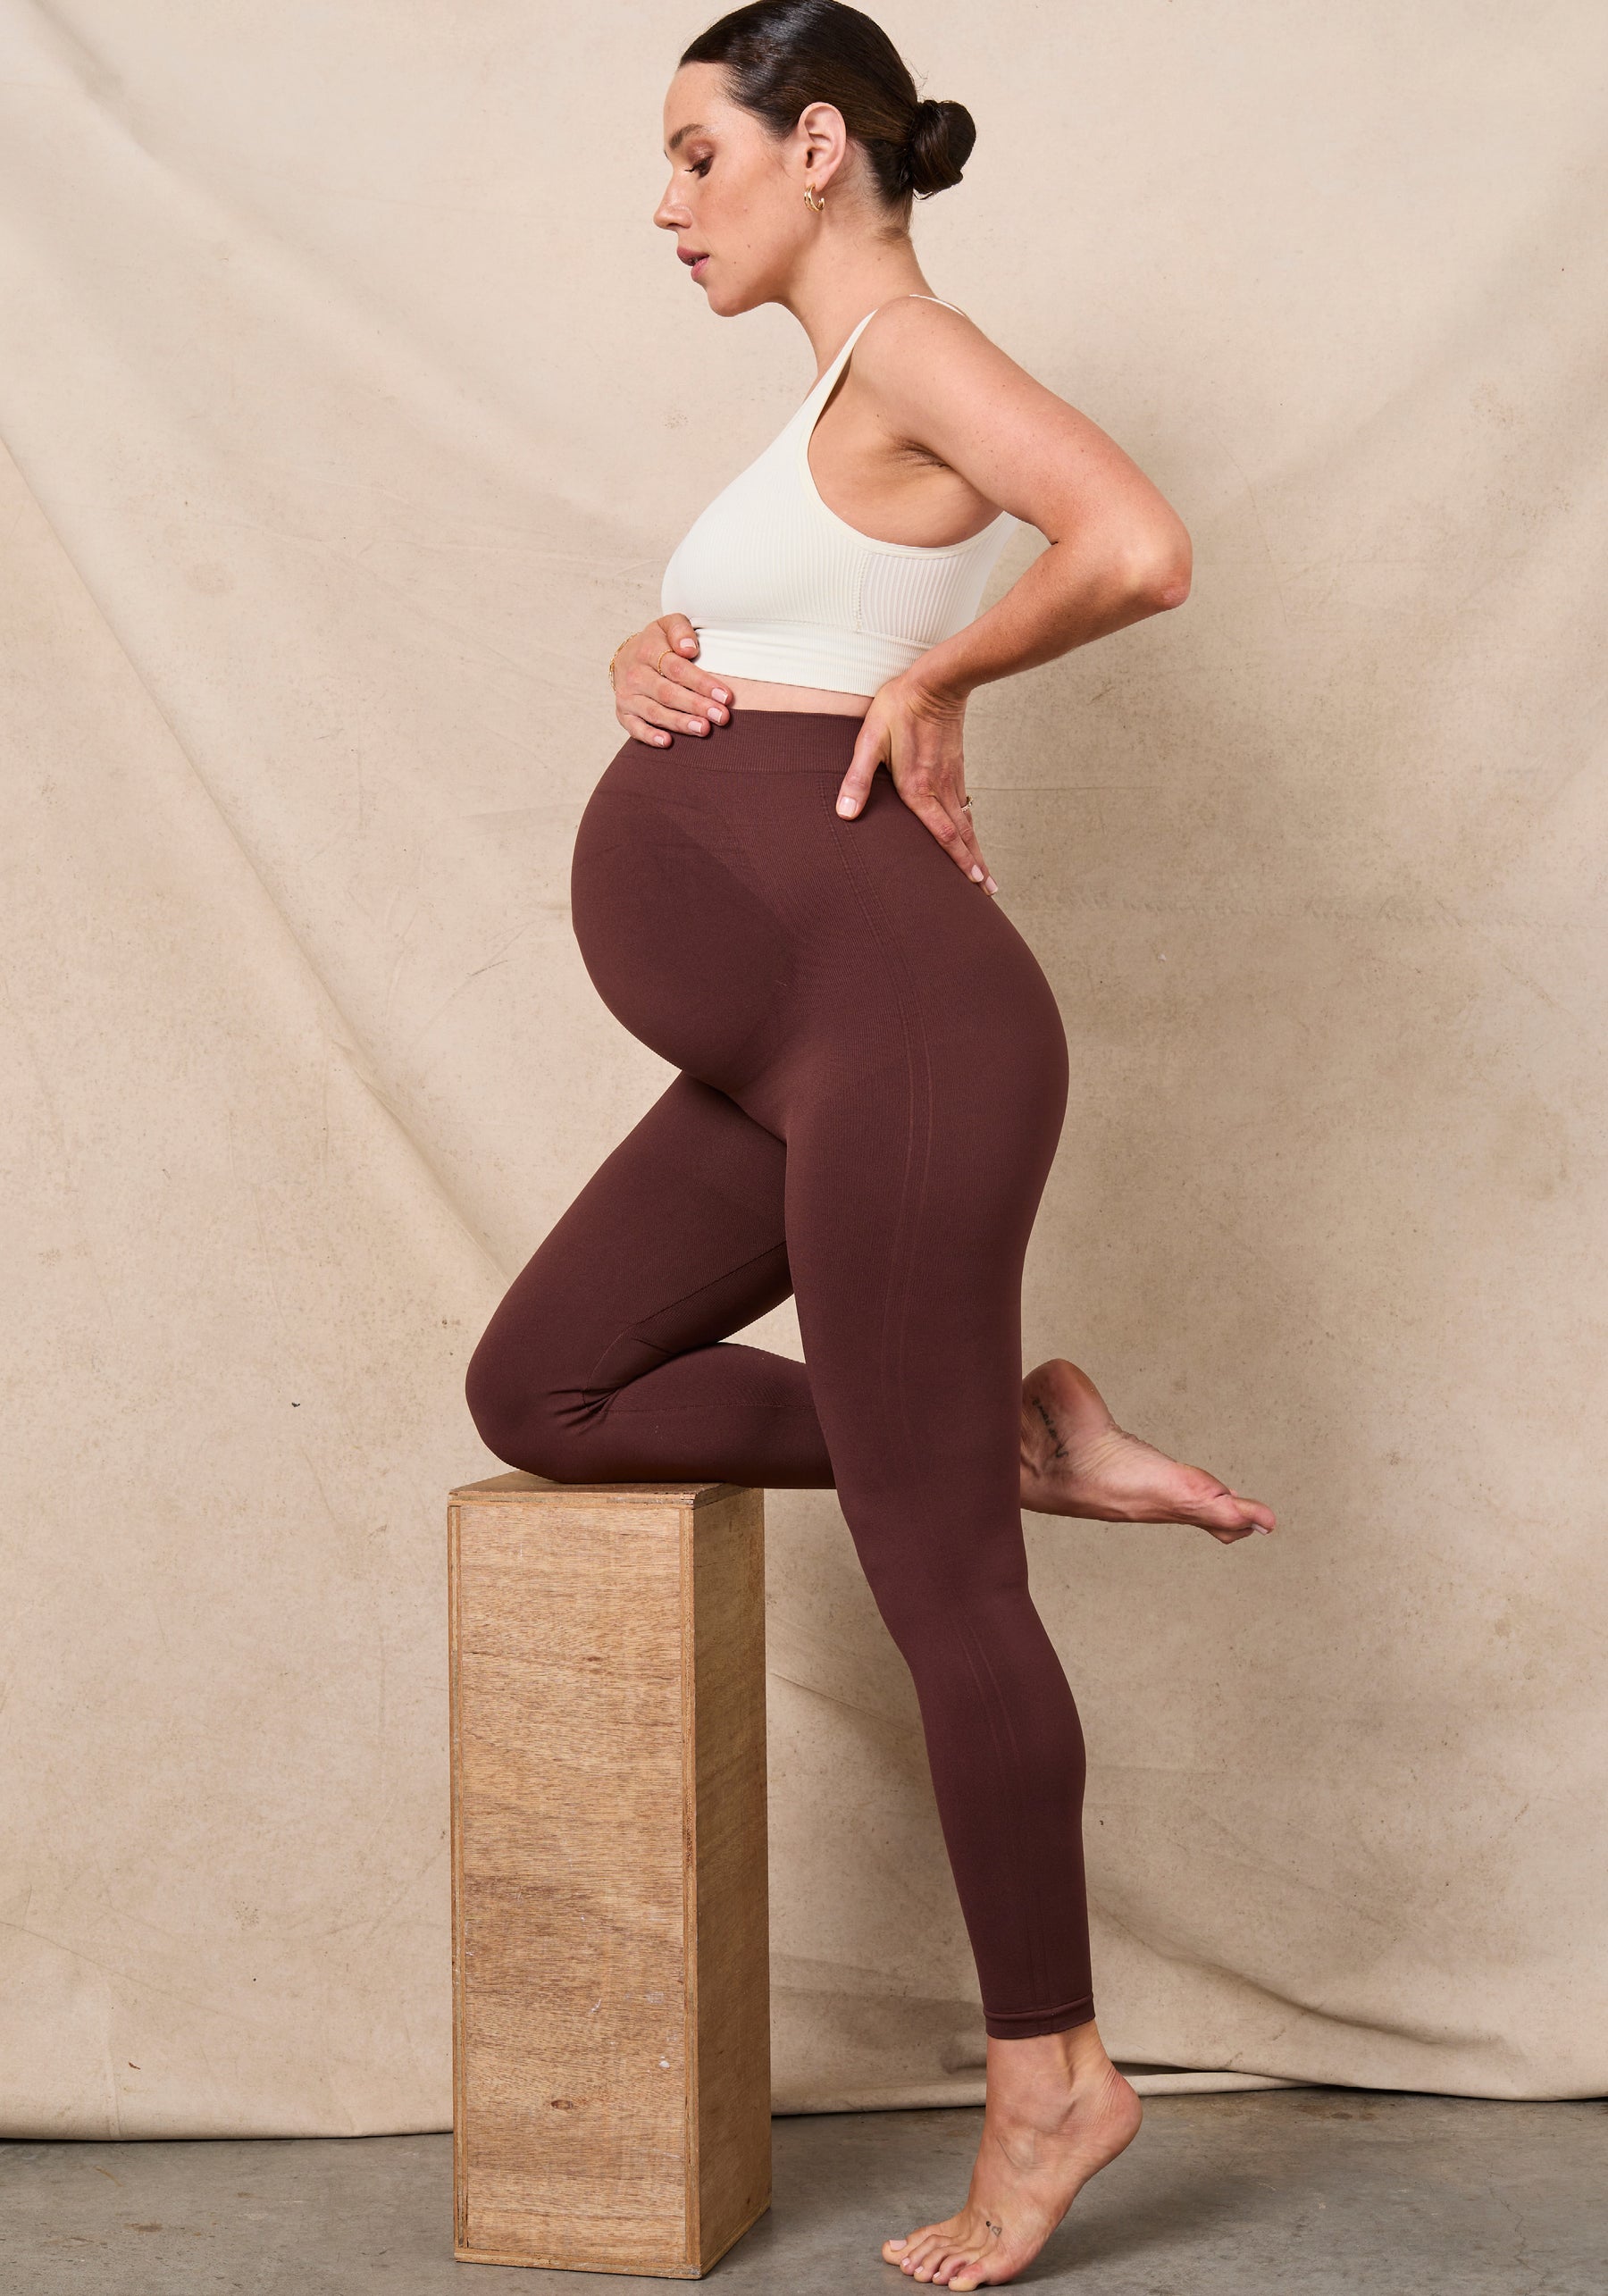 NWT $74 BLANQI [ XL ] Everyday Maternity Belly Support Leggings